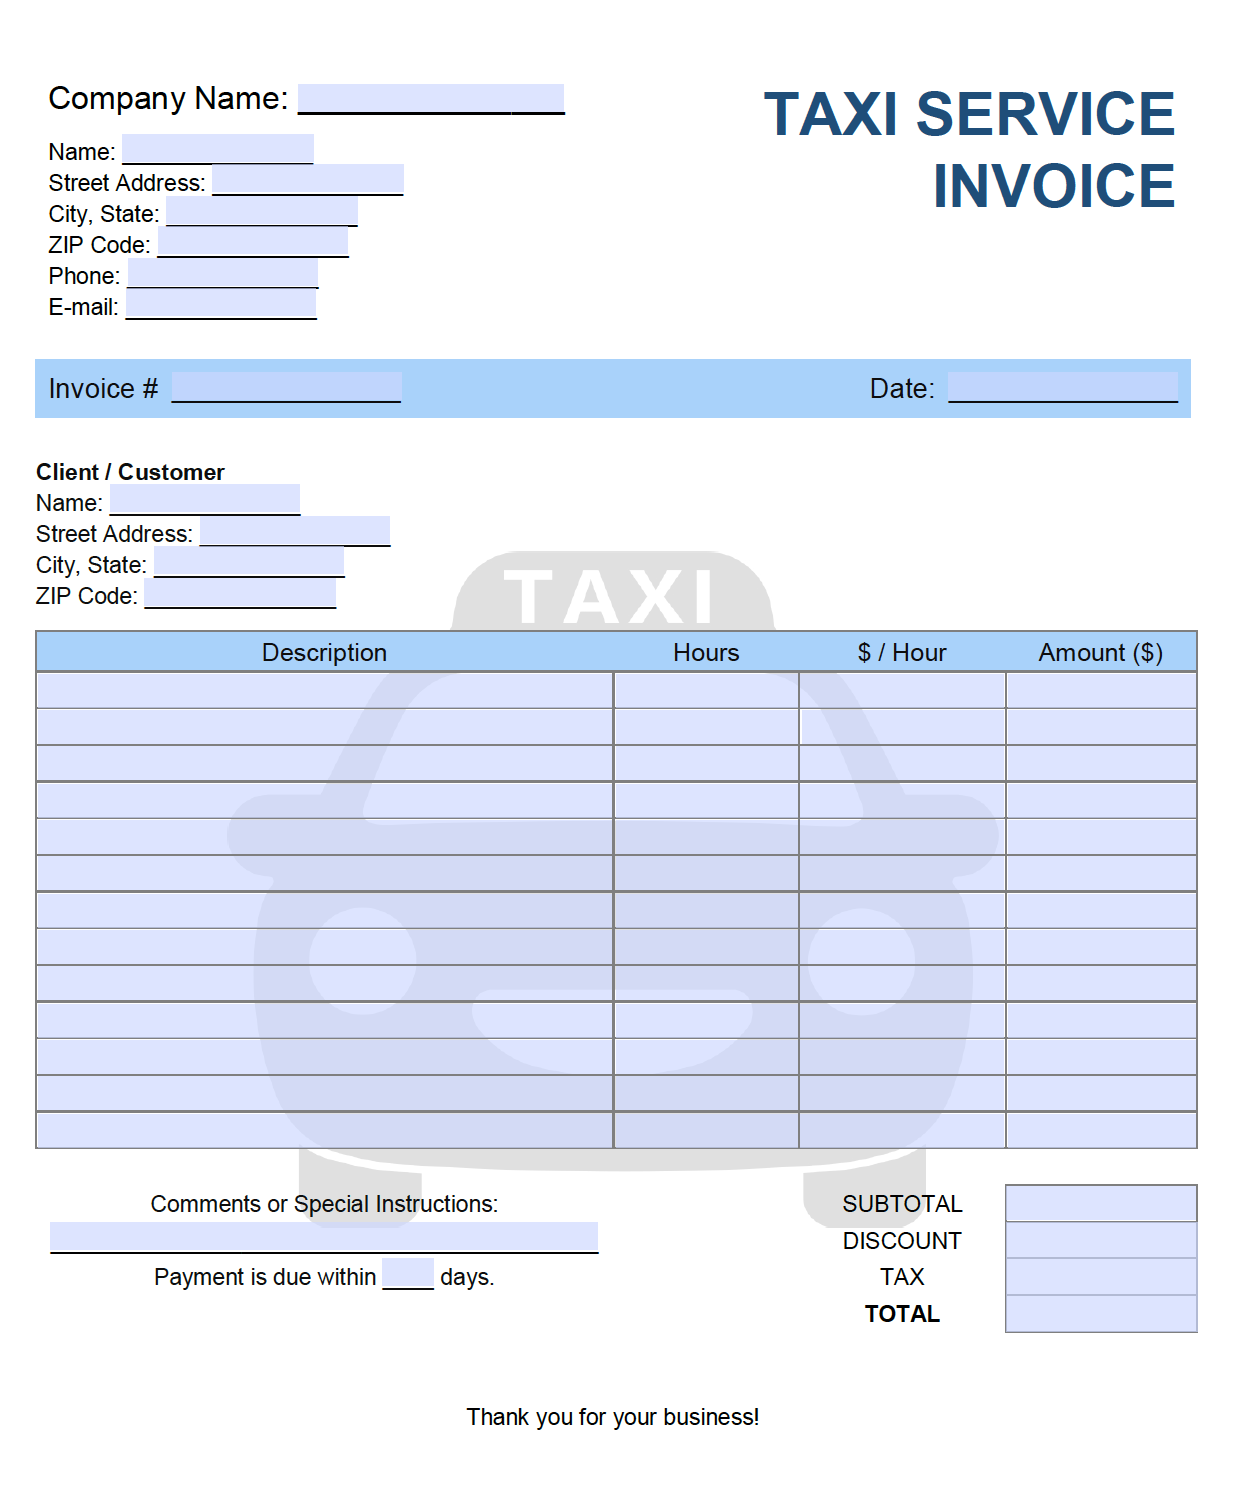 10 different designs 100 cab receipts in total Taxi receipts expenses blanks